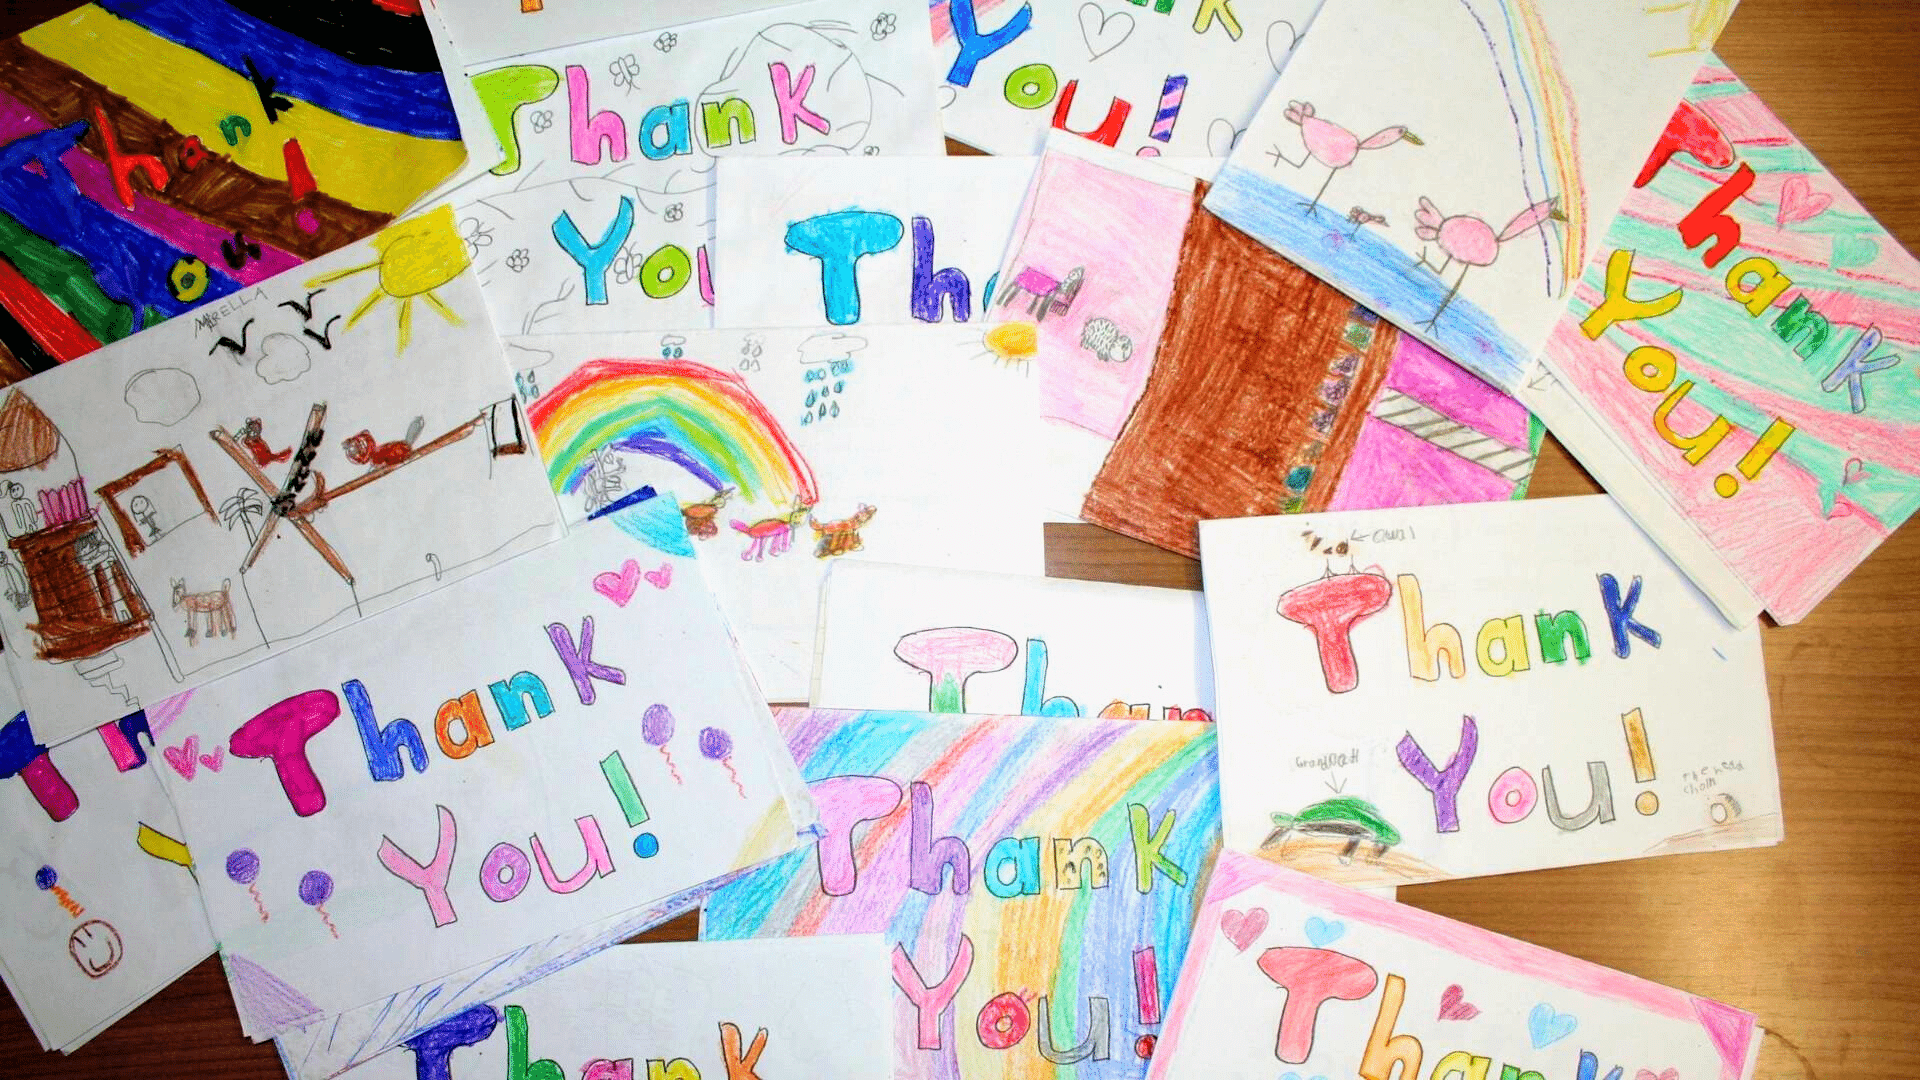 Thank You Cards from Education Grants